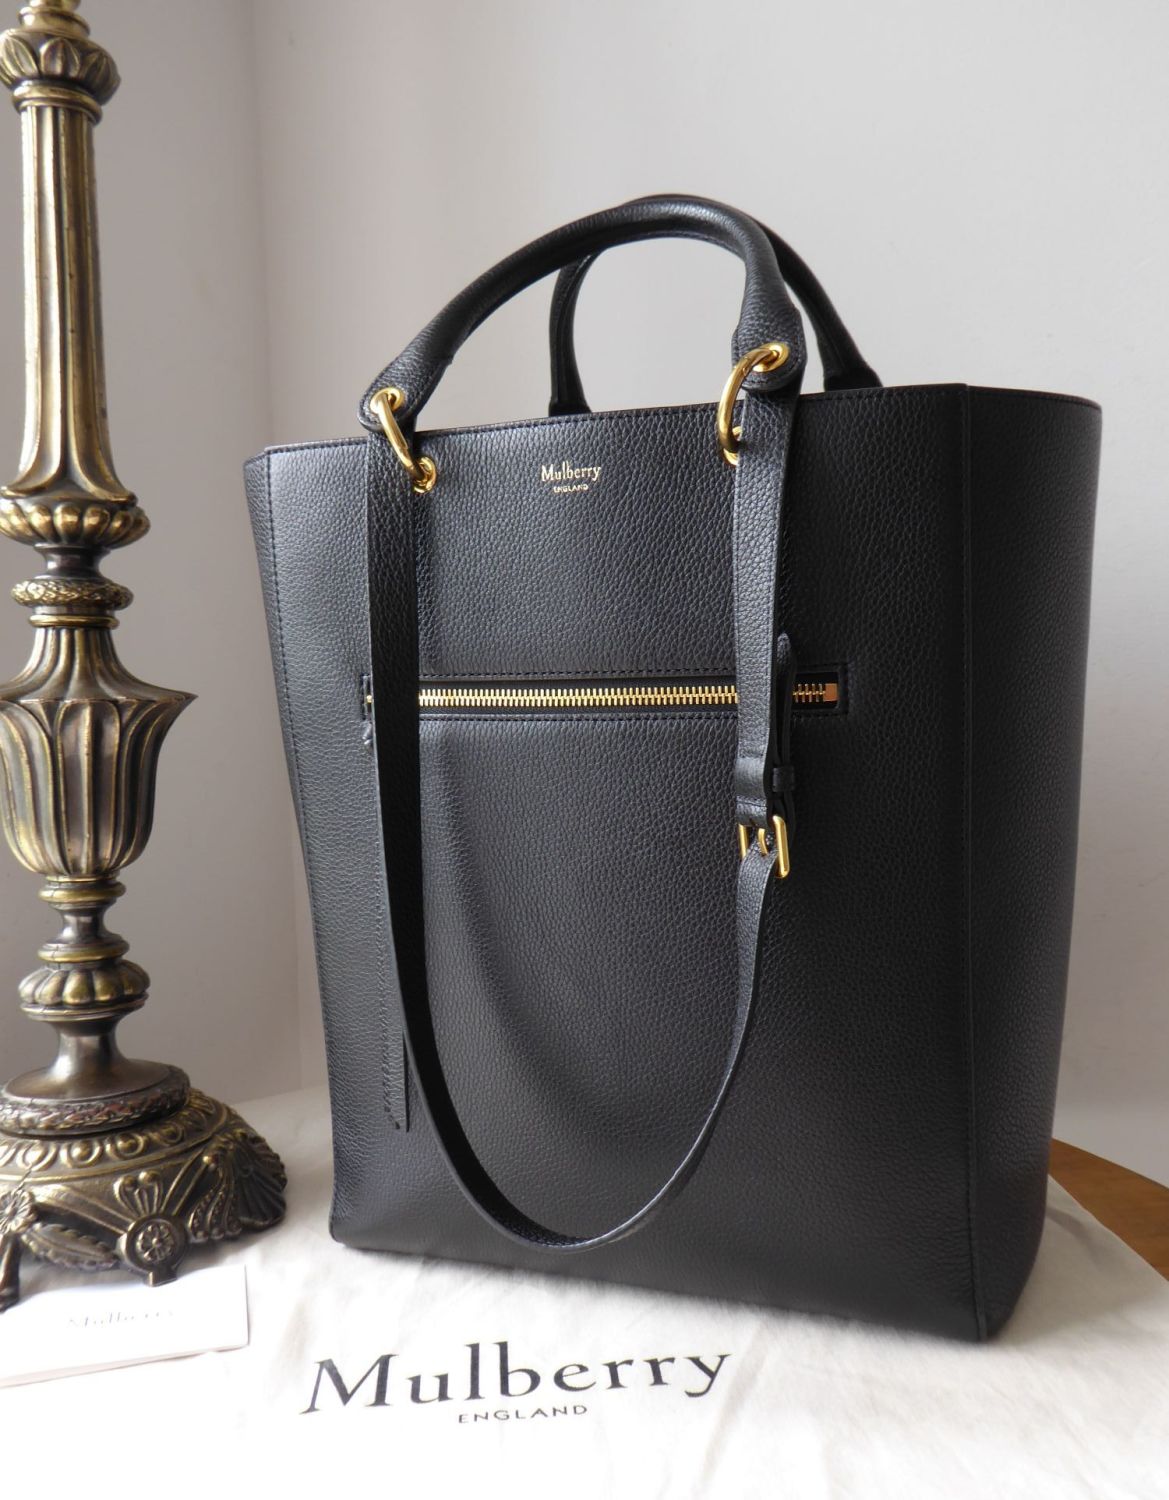 Mulberry Large Maple Tote in Black Small Classic Grain Leather with ...